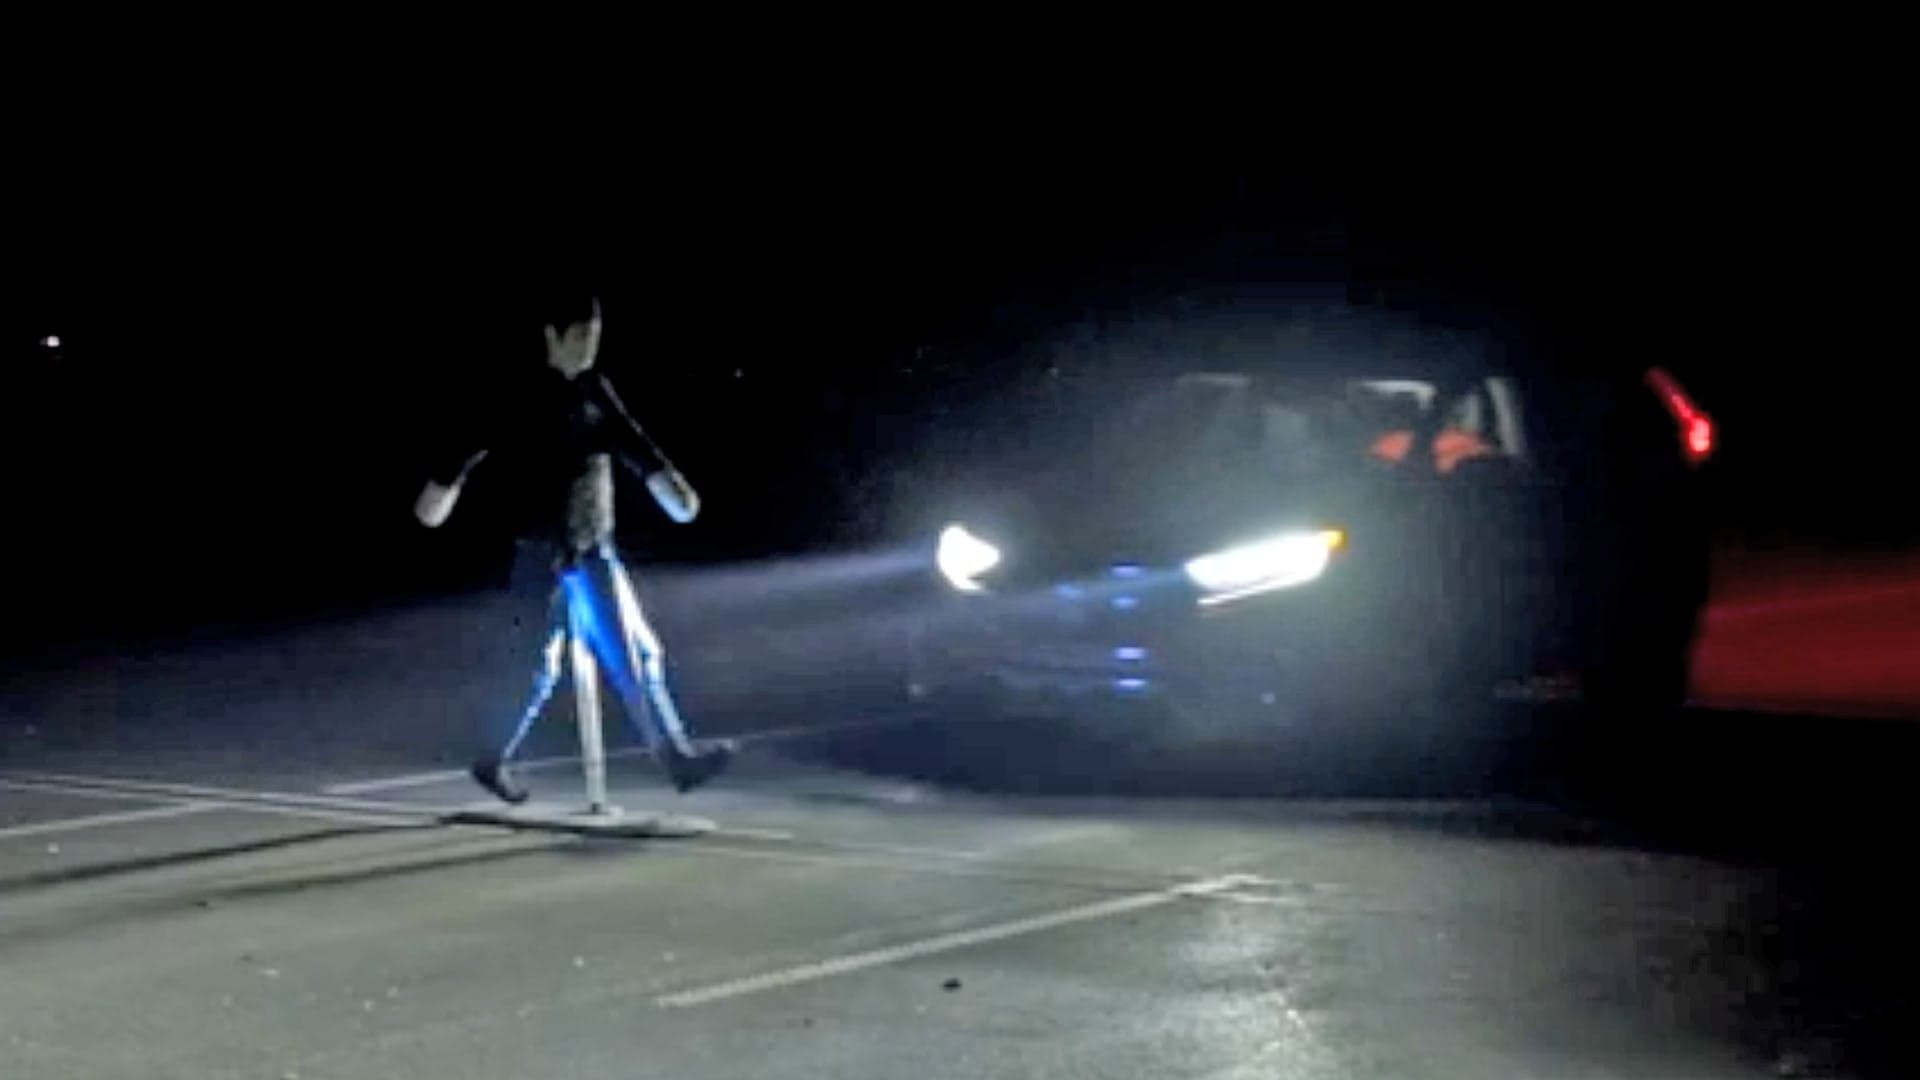 Pedestrian Collision Avoidance Systems Make ‘No Difference’ in the Dark: IIHS